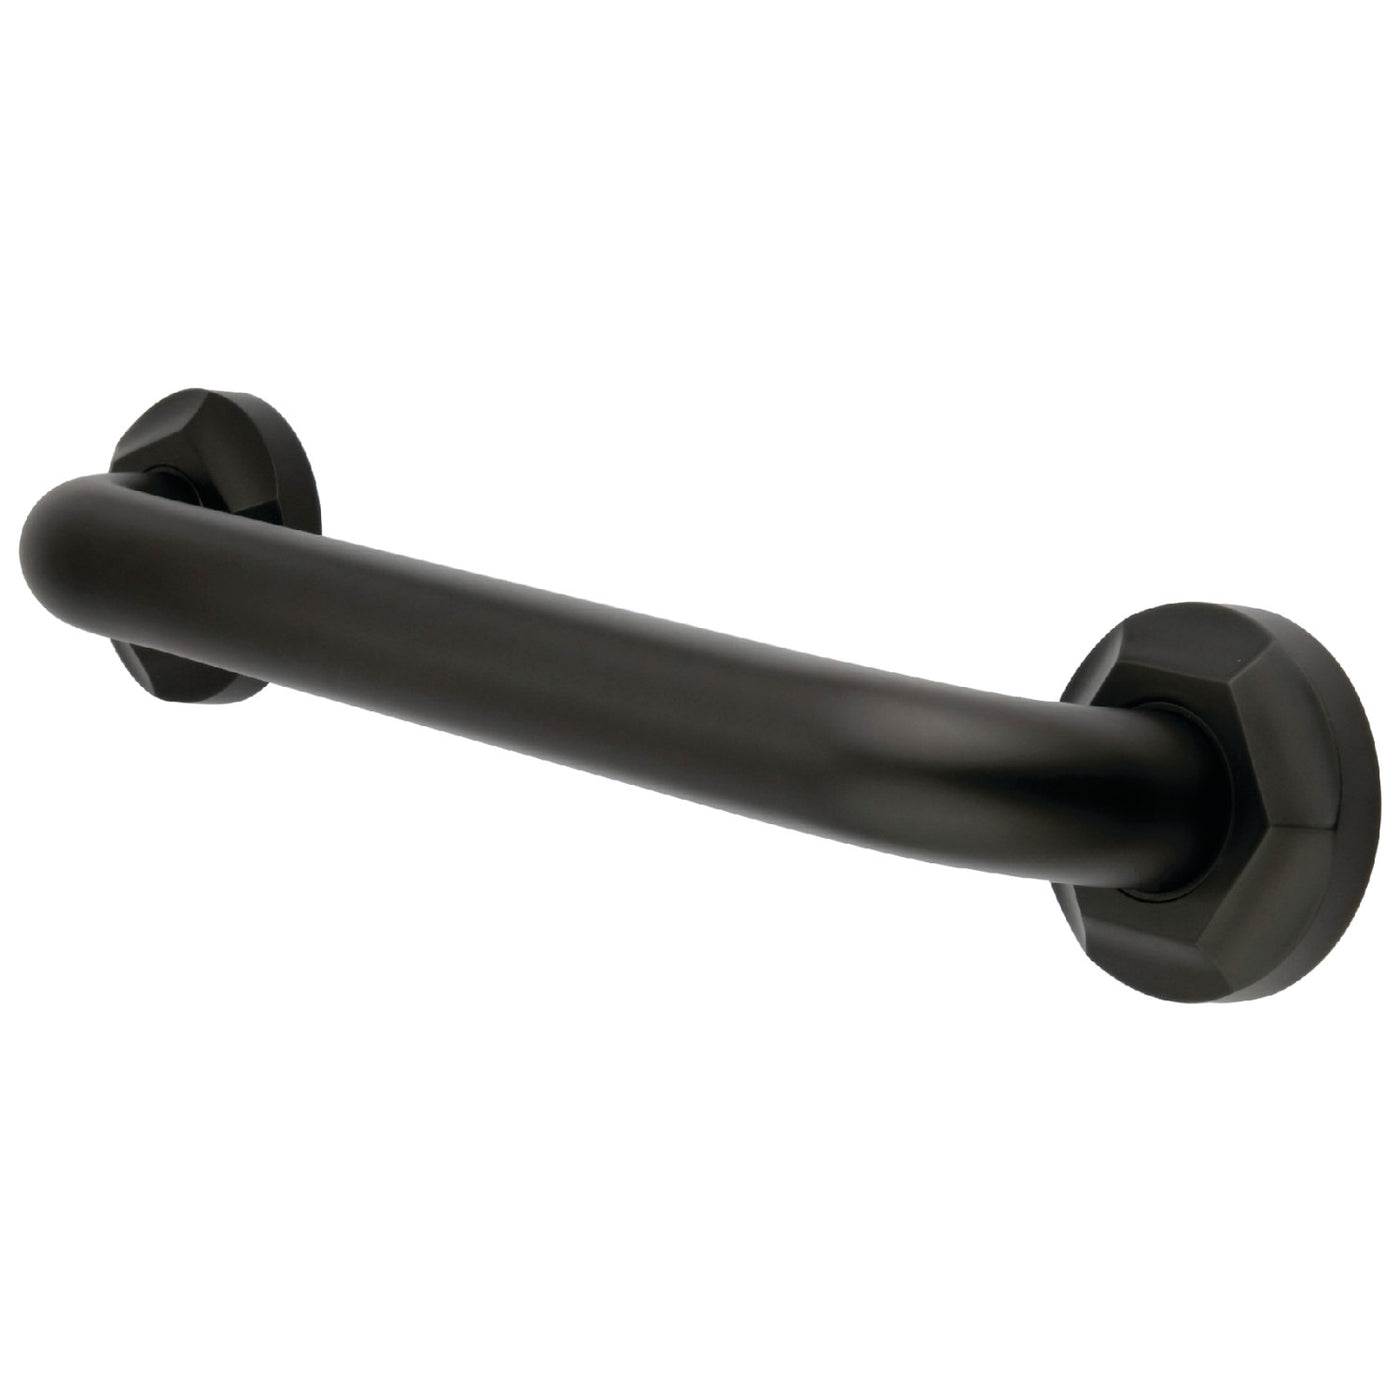 Elements of Design EDR714125 12-Inch x 1-1/4-Inch O.D Grab Bar, Oil Rubbed Bronze